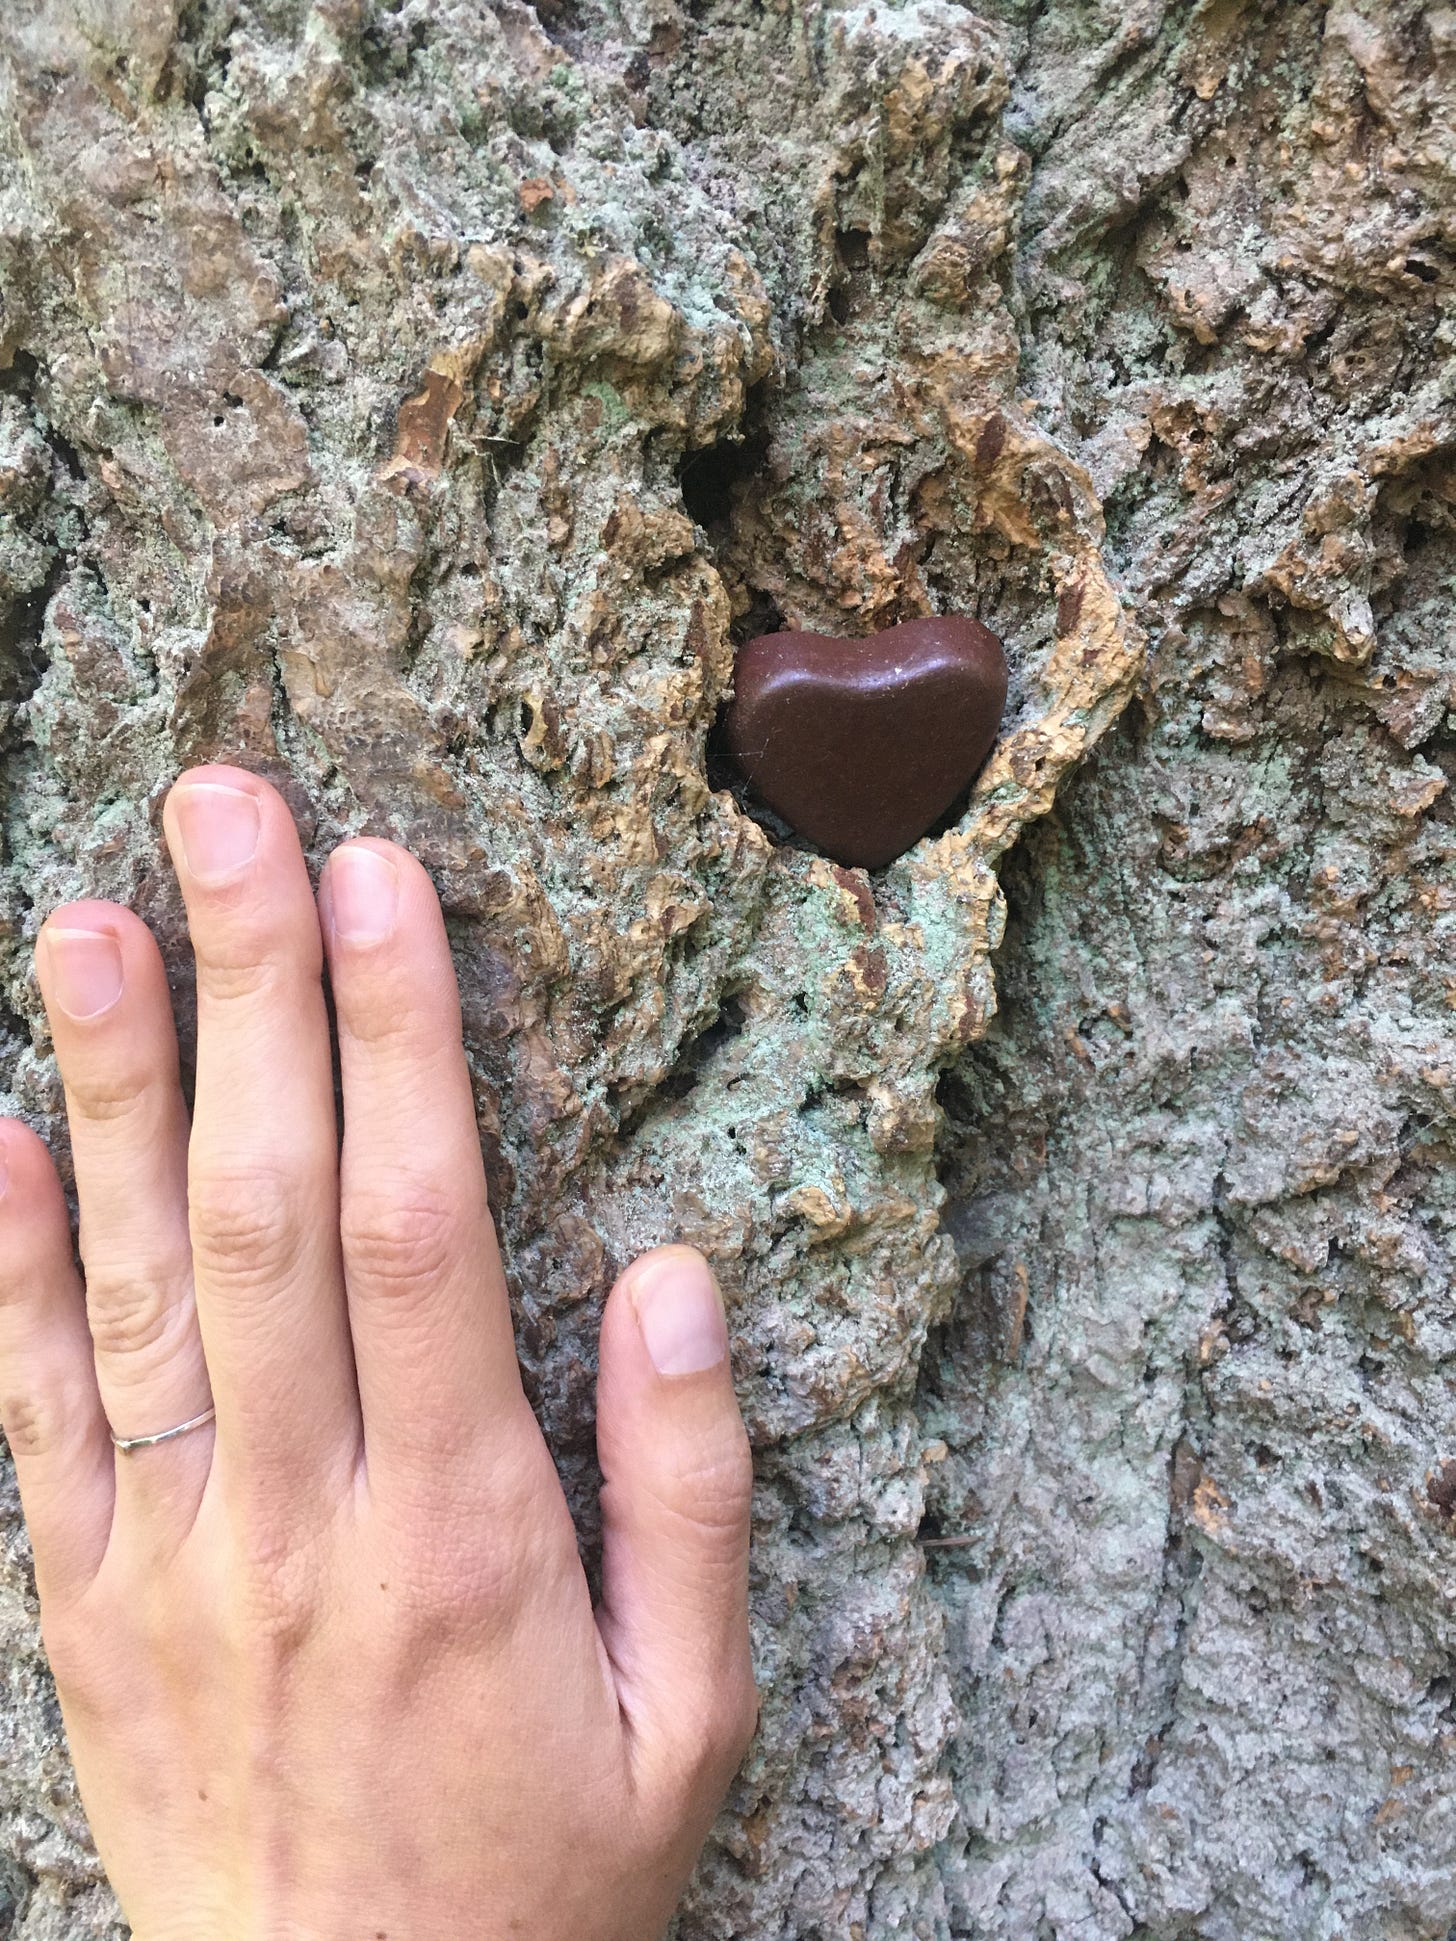 rough tree bark takes up the whole image with a small brown stone heart tucked into the bark, sitting in the tree. Cassandra's left hand is a pale color and she is wearing a thin wedding ring on her ring finger. the hand lays flat on the tree trunk to the left of the heart.